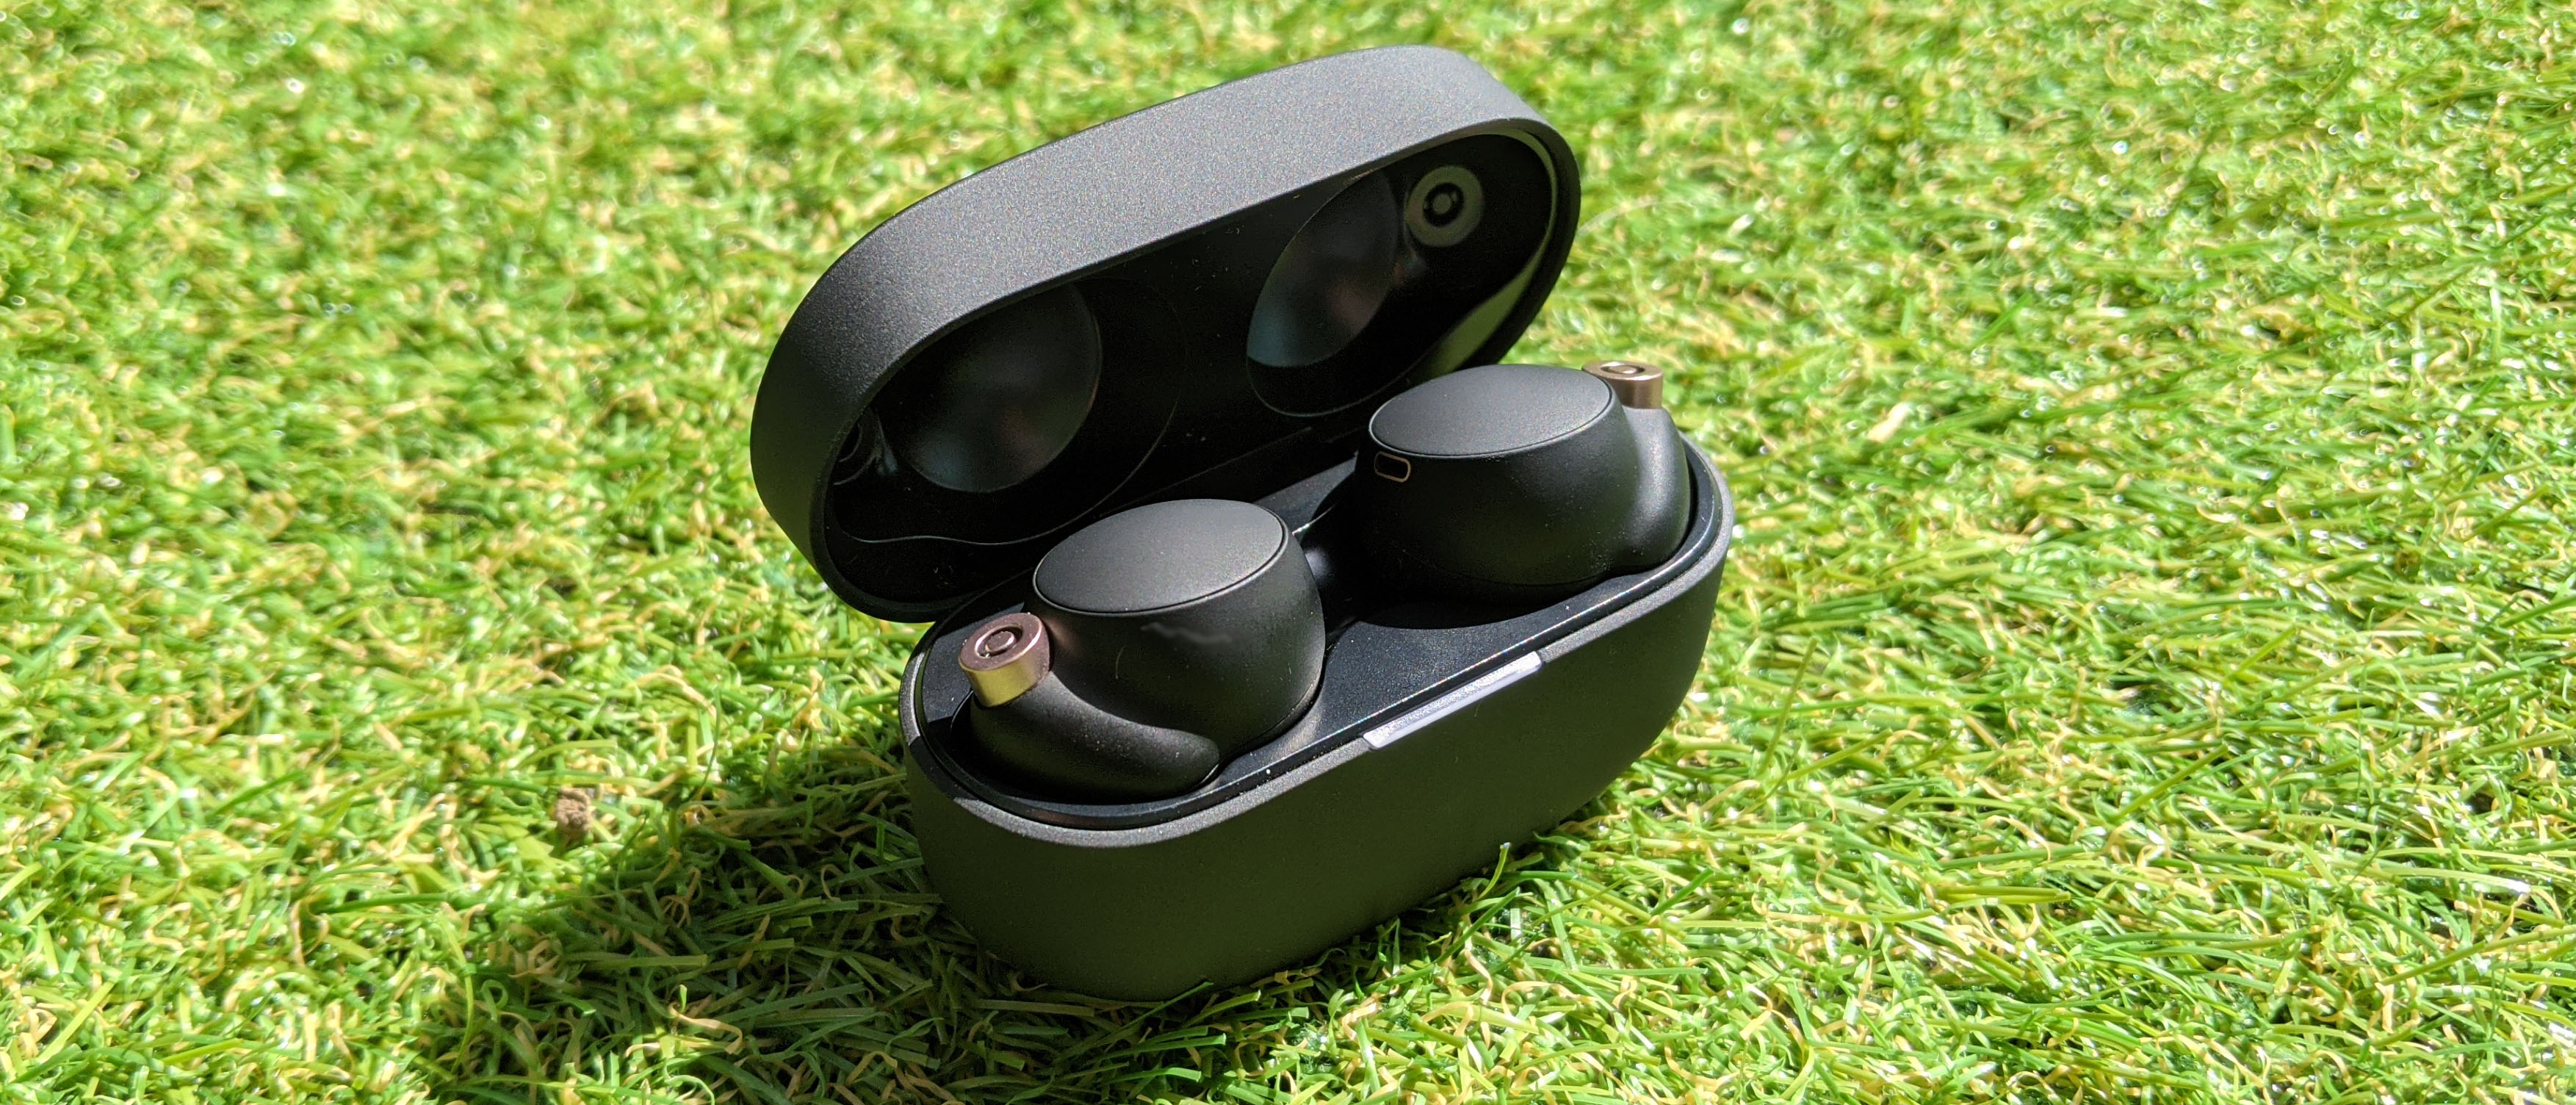 Sony WF-1000XM4 Earbuds Review: the Best Wireless Earbuds You Can Buy